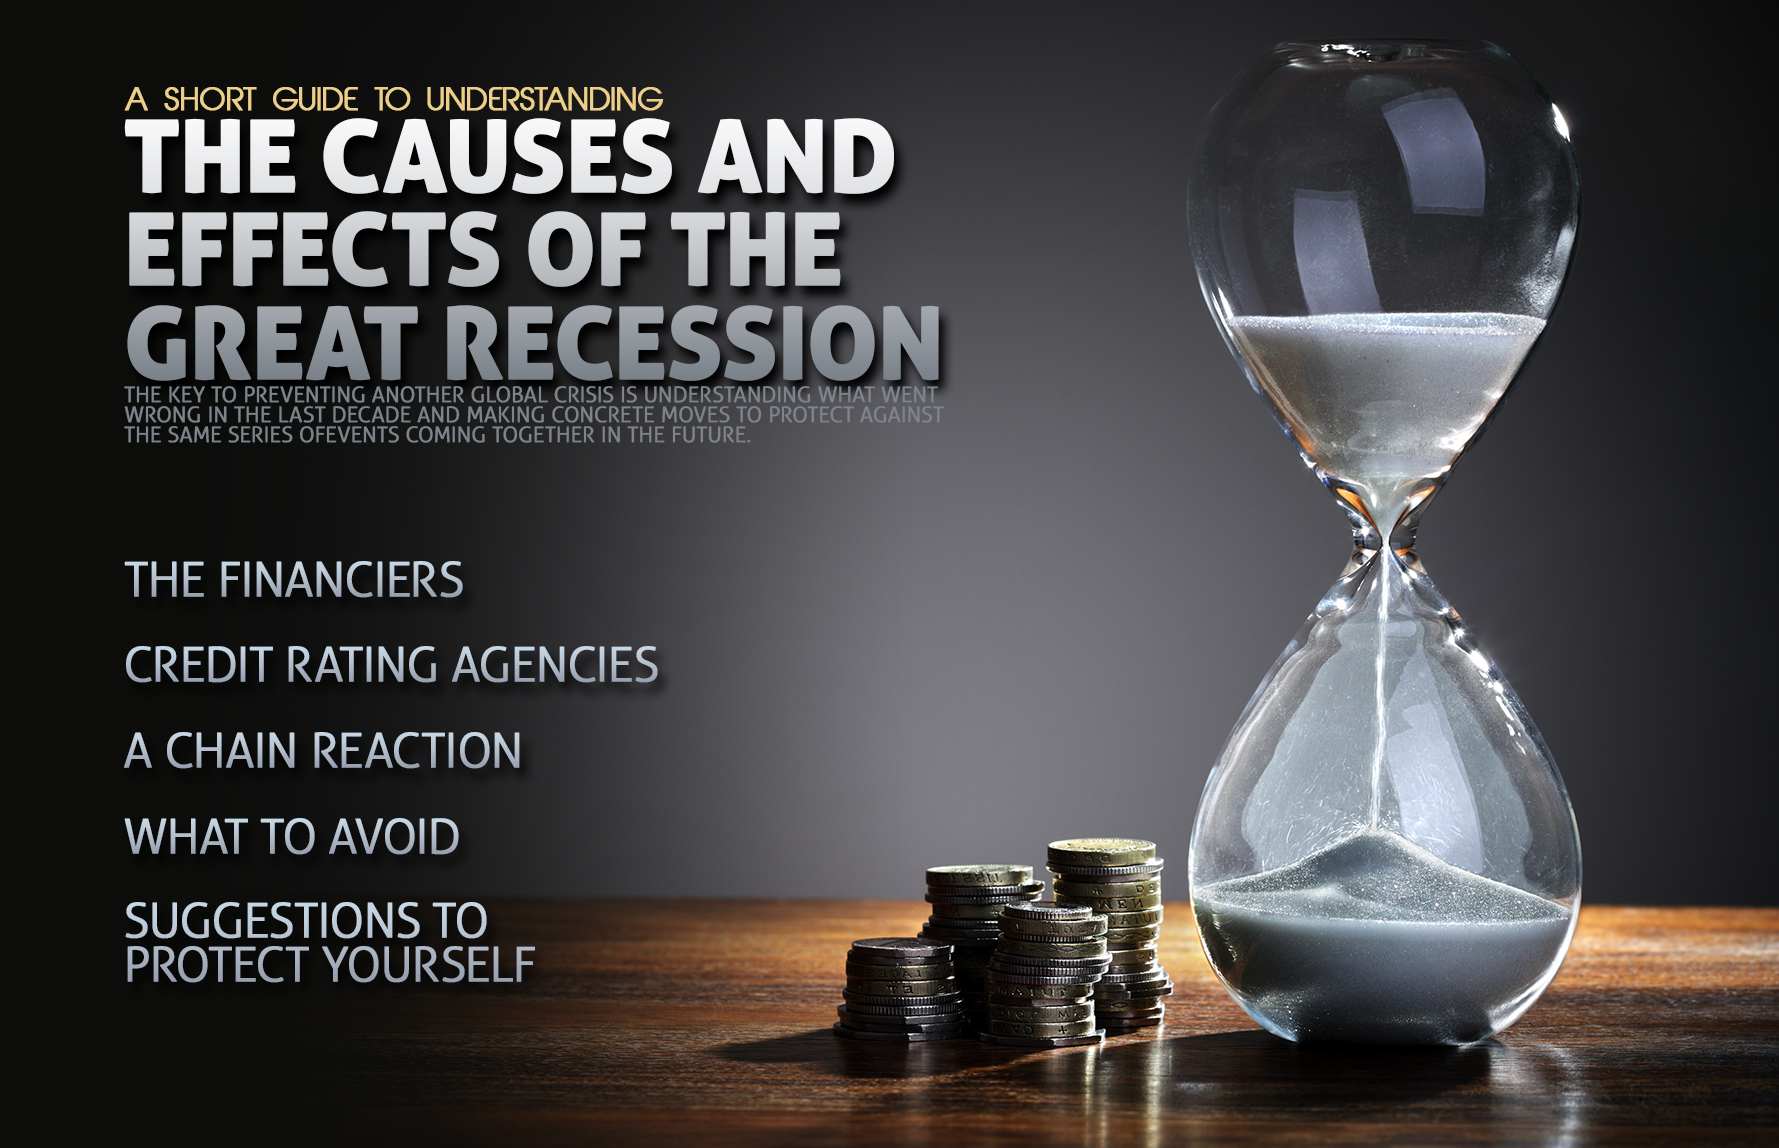 What caused the great recession